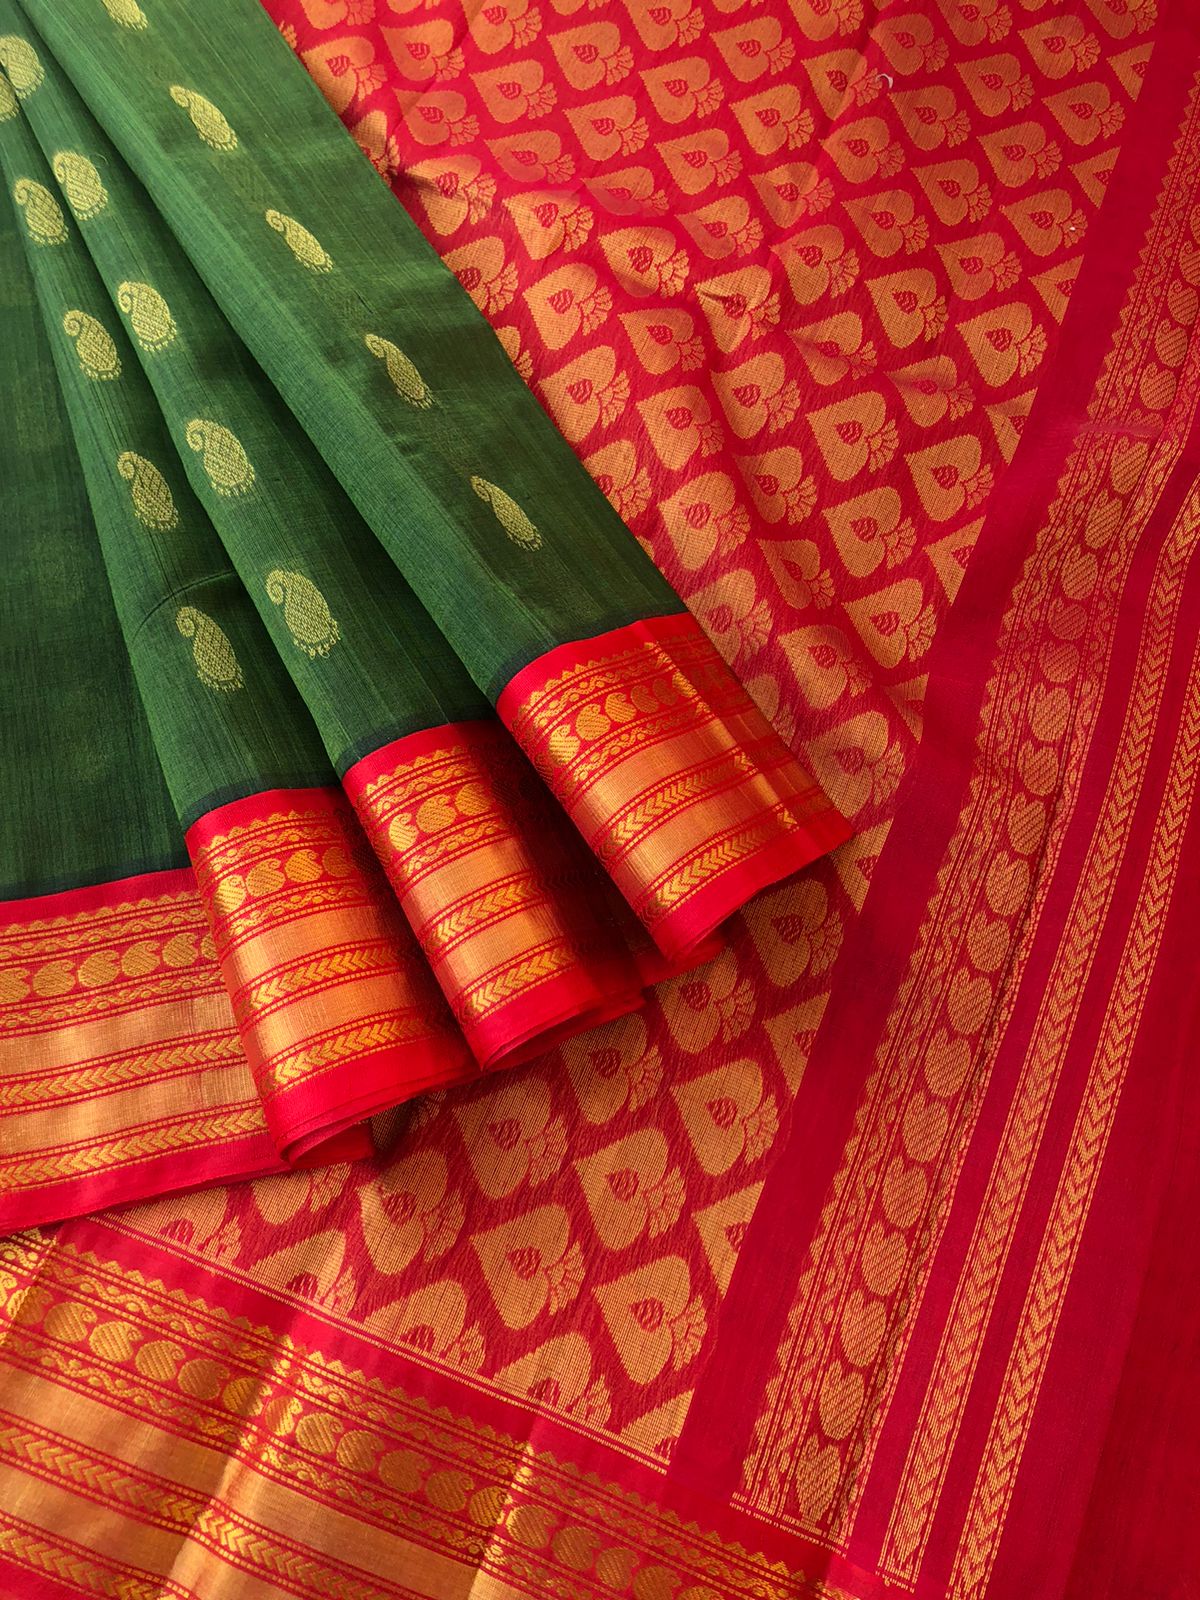 Korvai Silk Cottons Woven Silk Borders - burnt algae green and red with body woven buttas